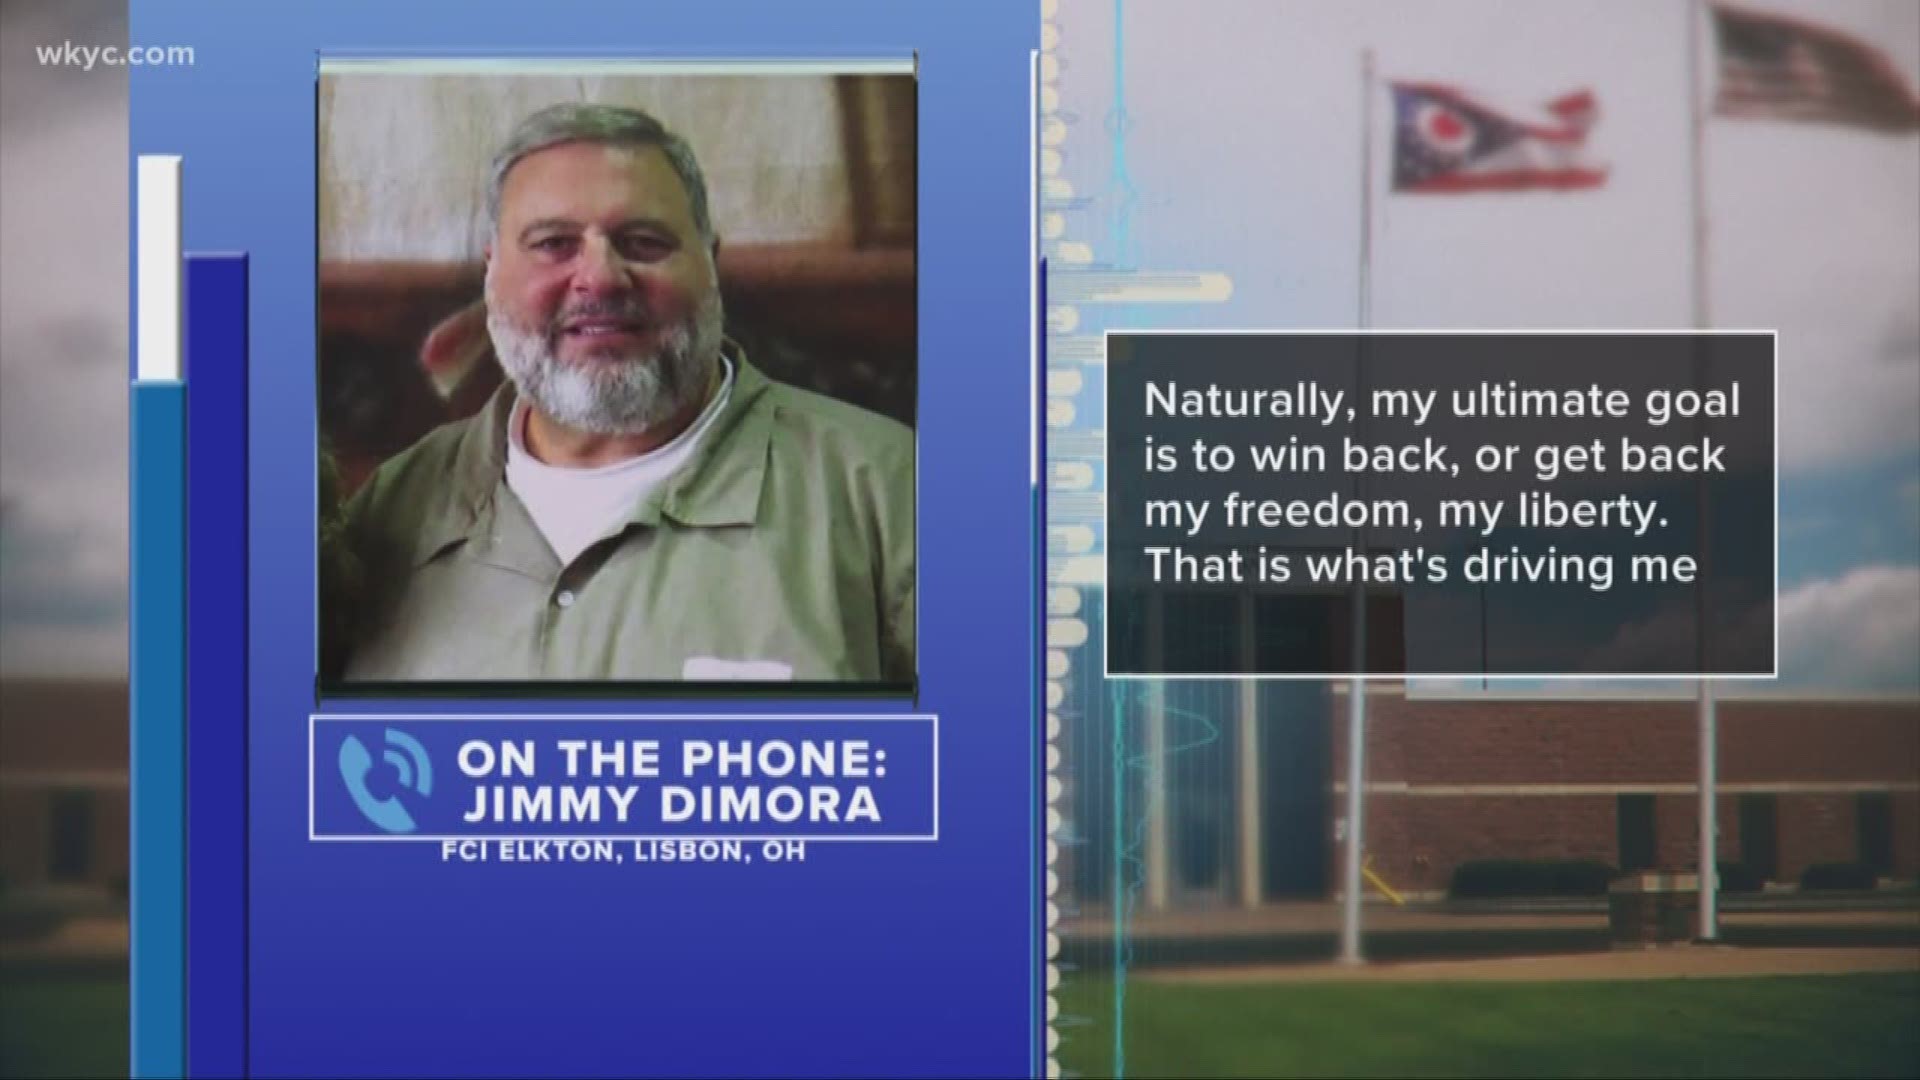 Jimmy Dimora talks exclusively with WKYC